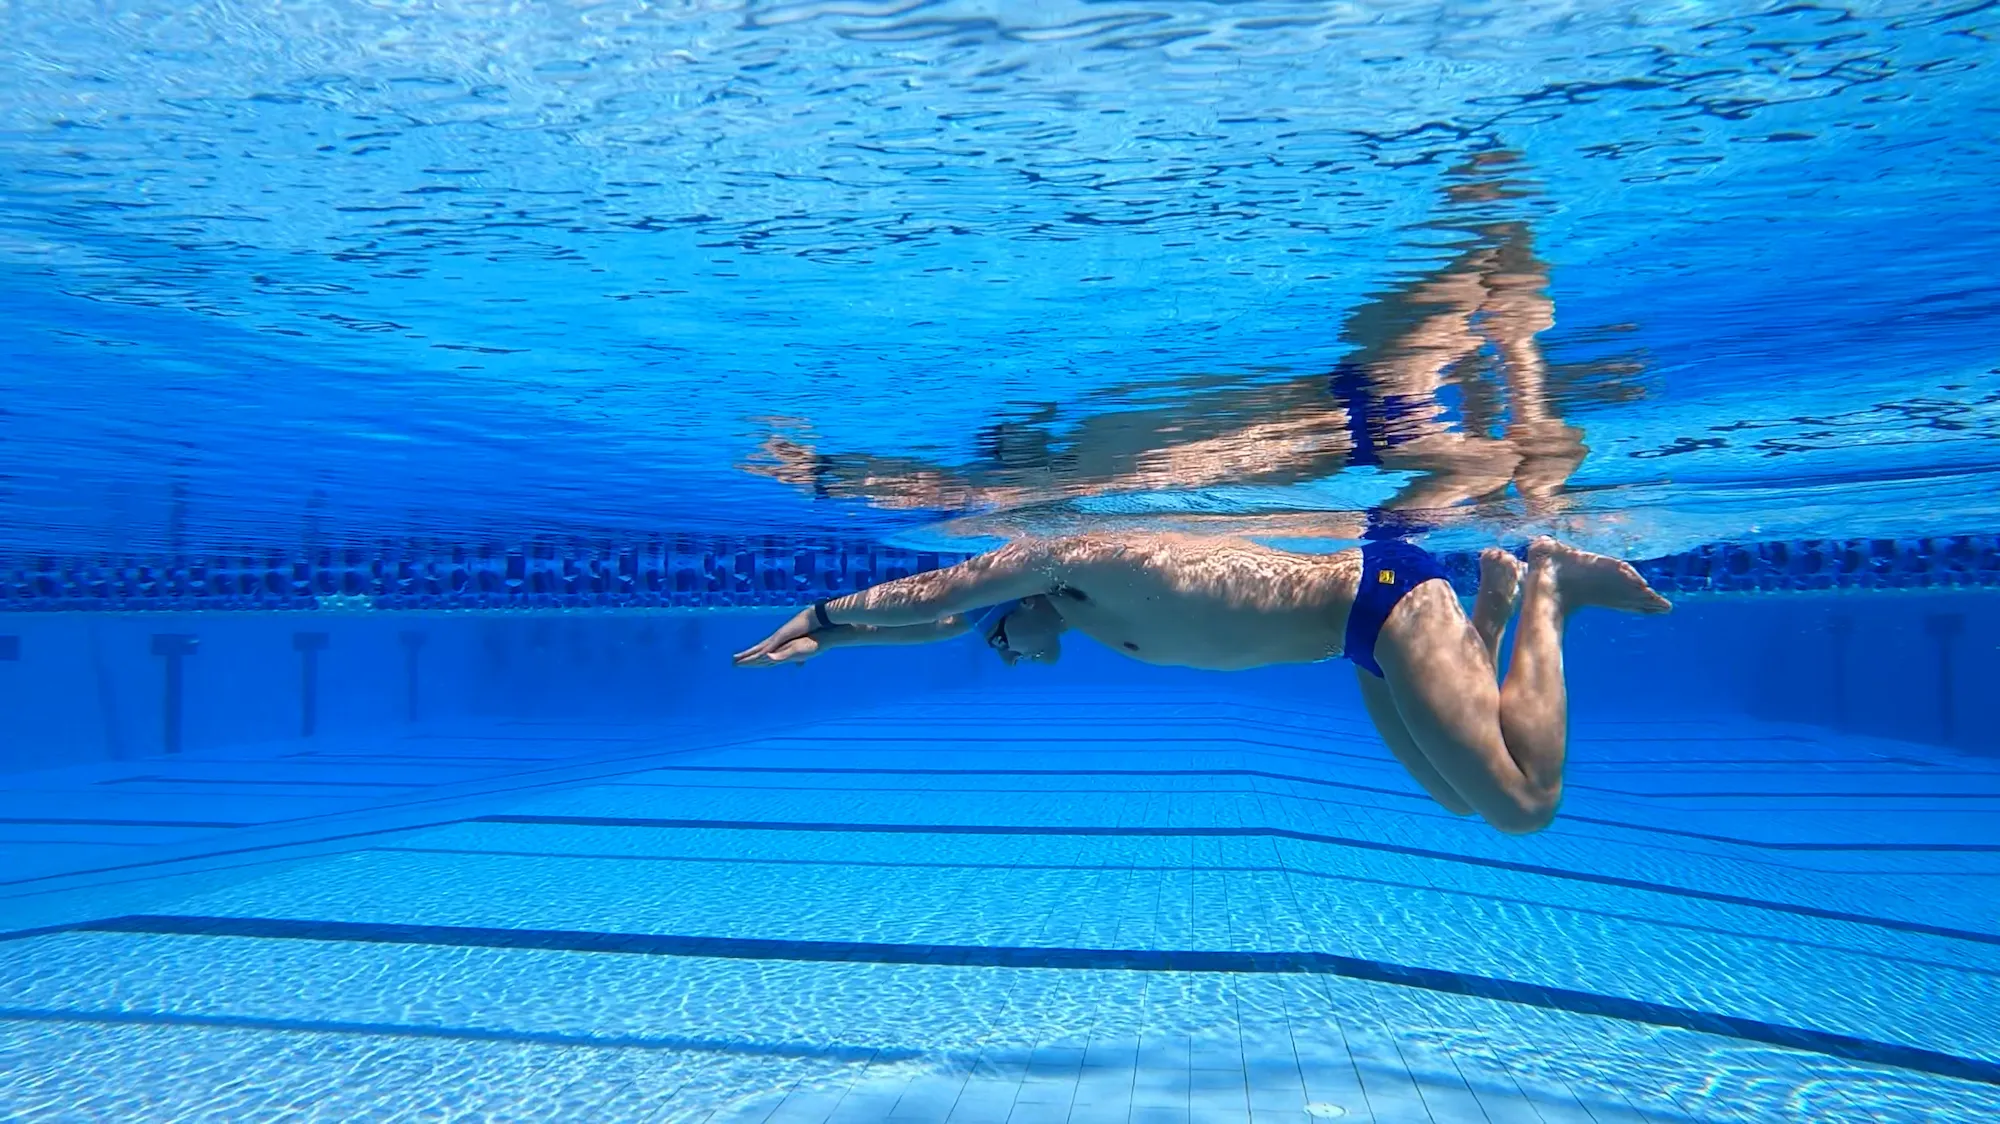 Mastering-the-art-of-breaststroke-starts-with-perfecting-your-body-position